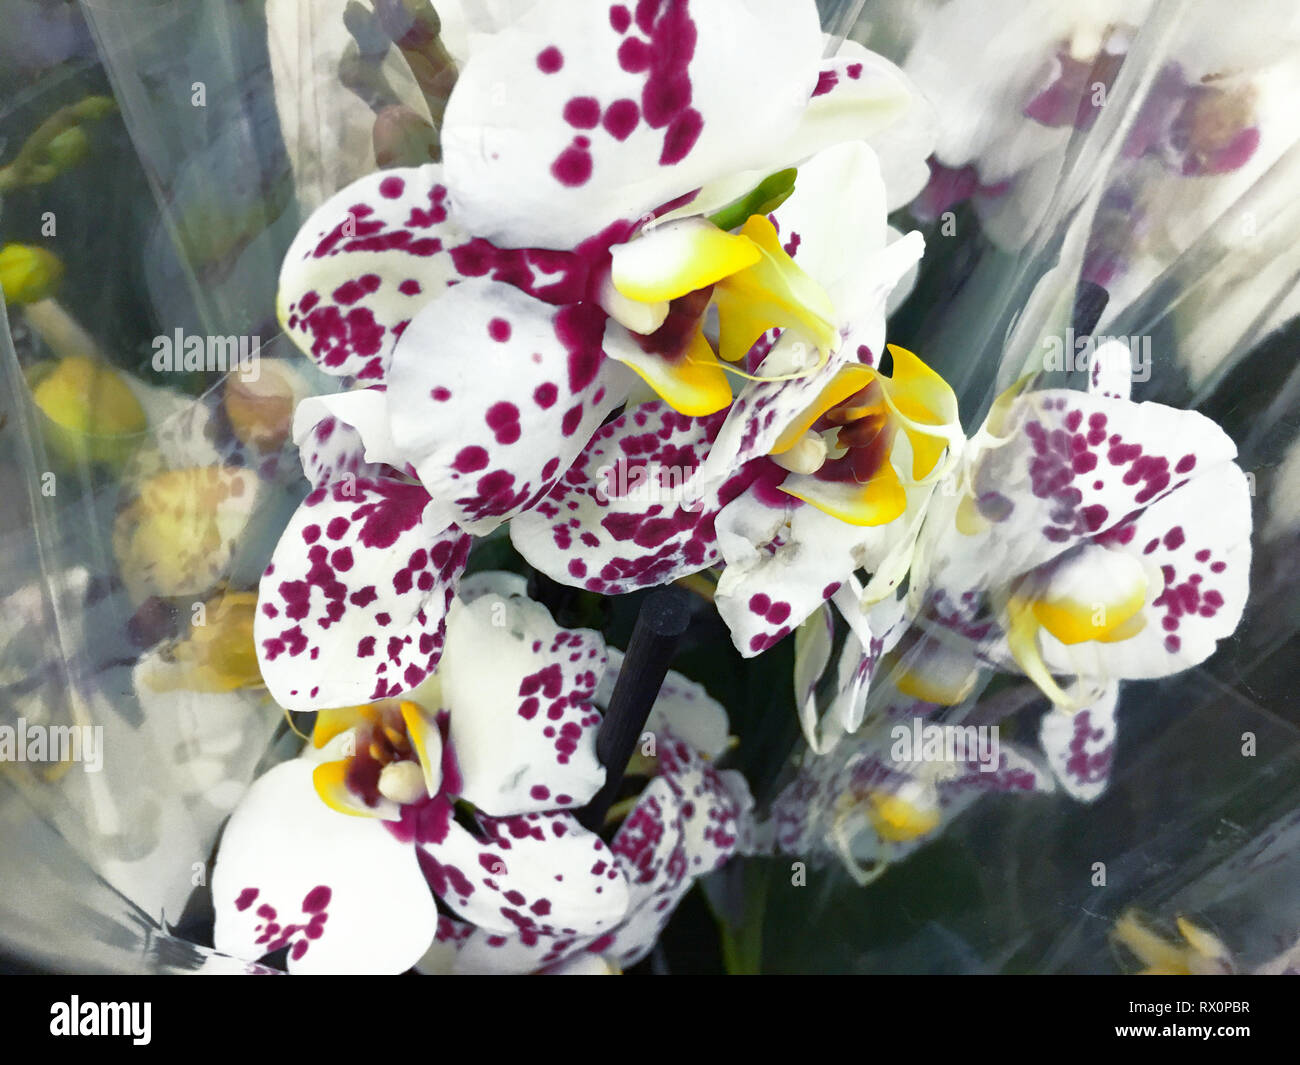 Flowering Orchid falenopsis prepared for sale at shop Stock Photo